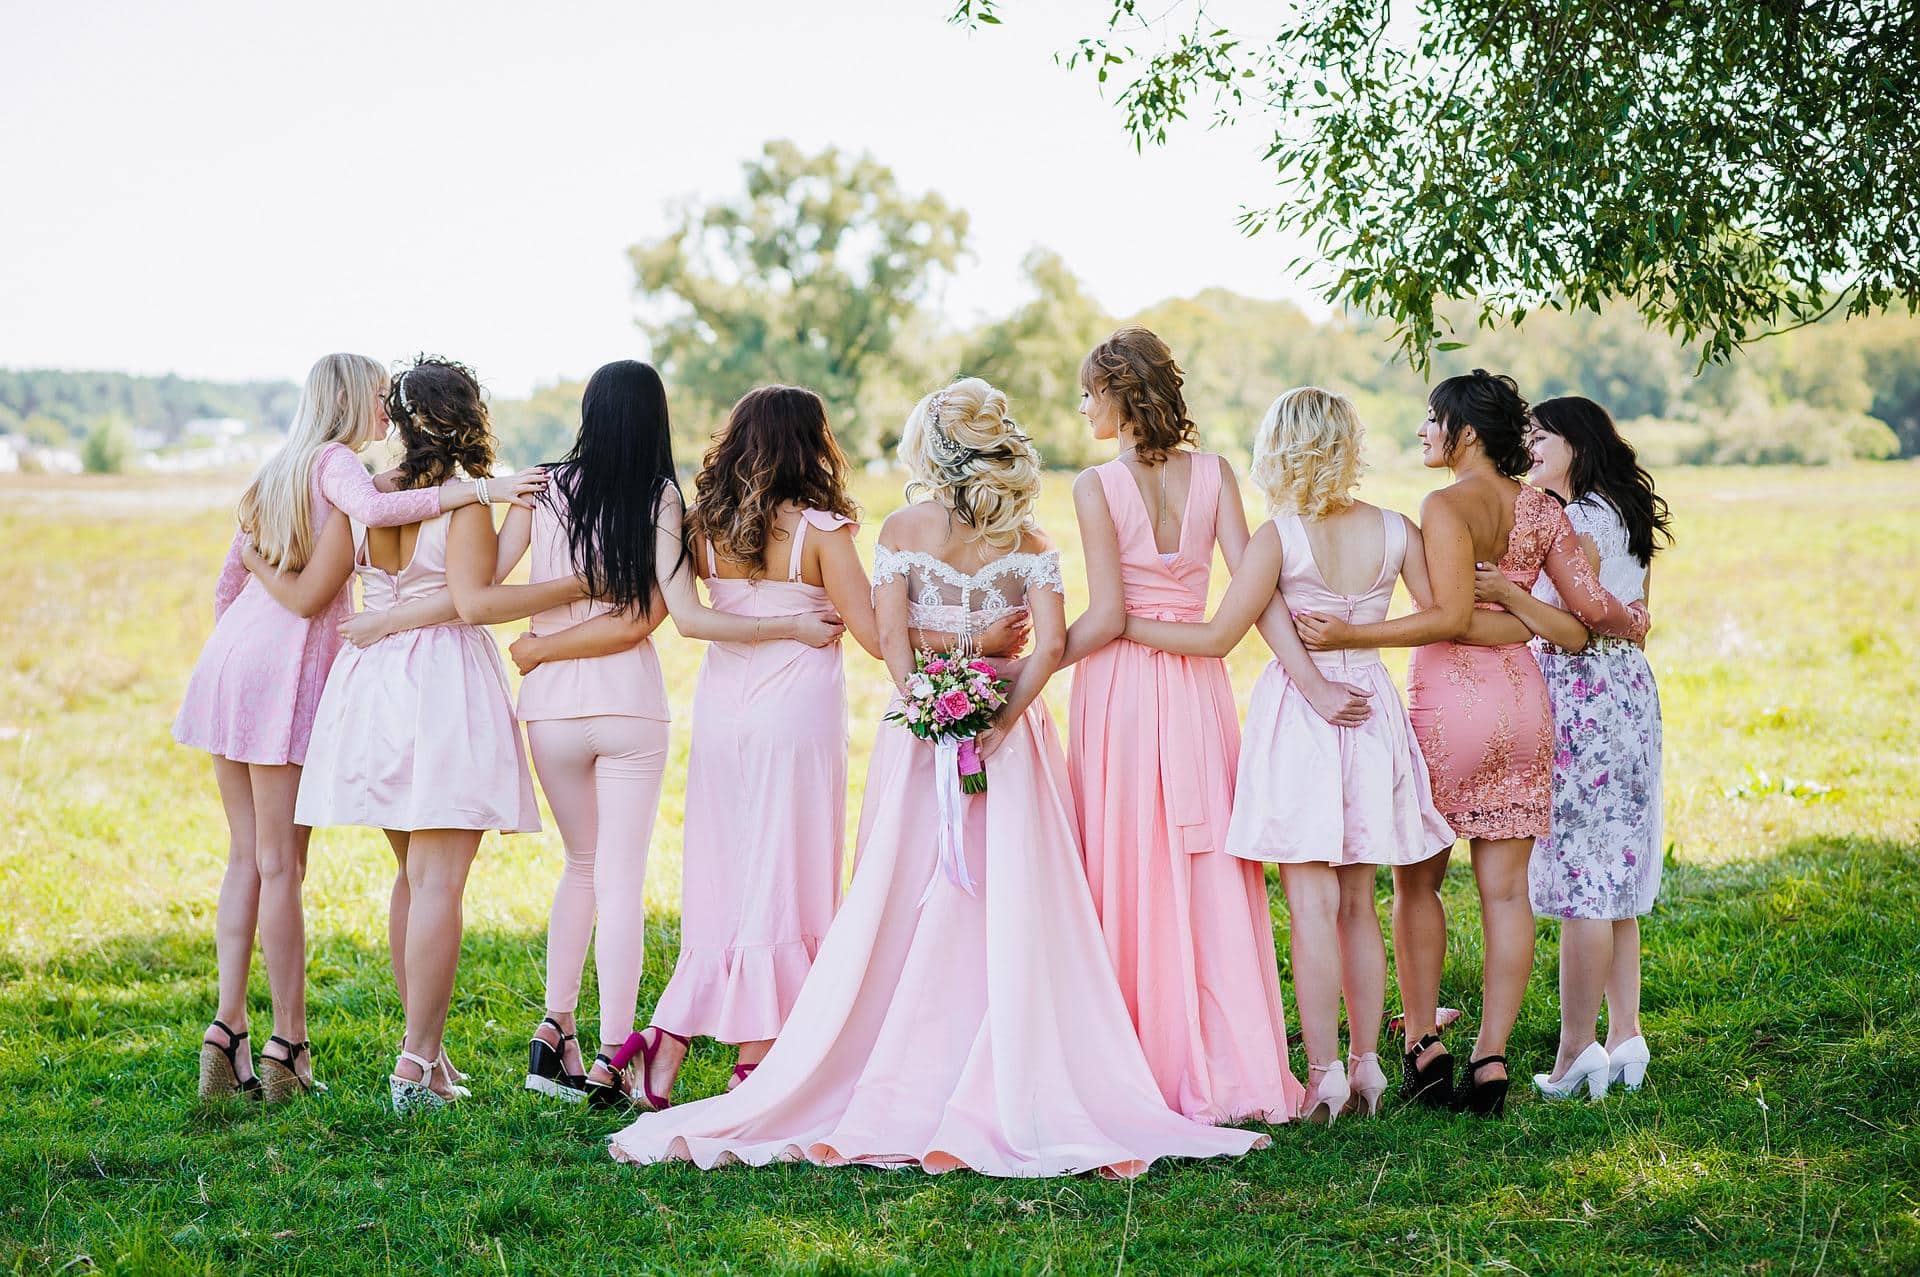 Get Paid to Be a Bridesmaid